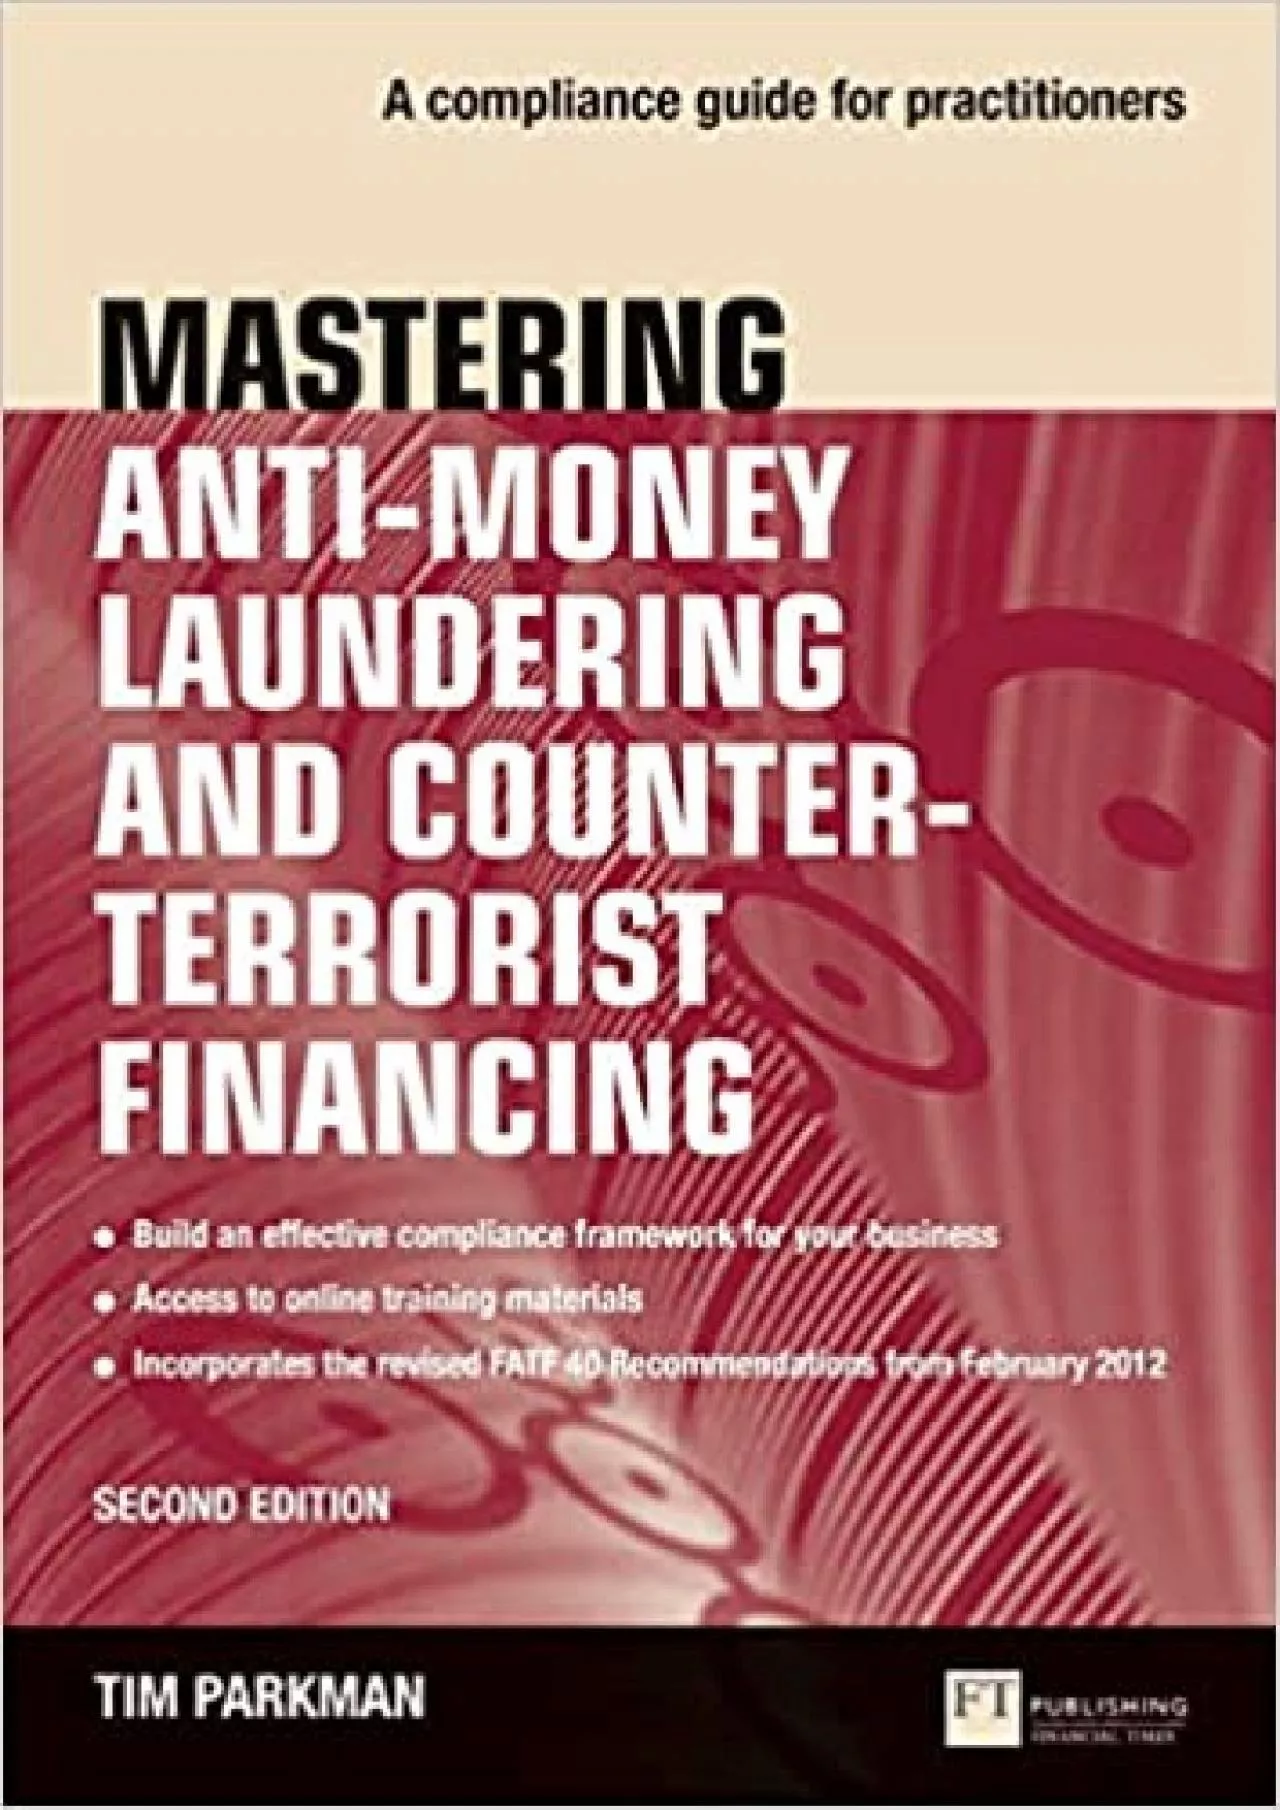 Mastering Anti-Money Laundering and Counter-Terrorist Financing: A compliance guide for